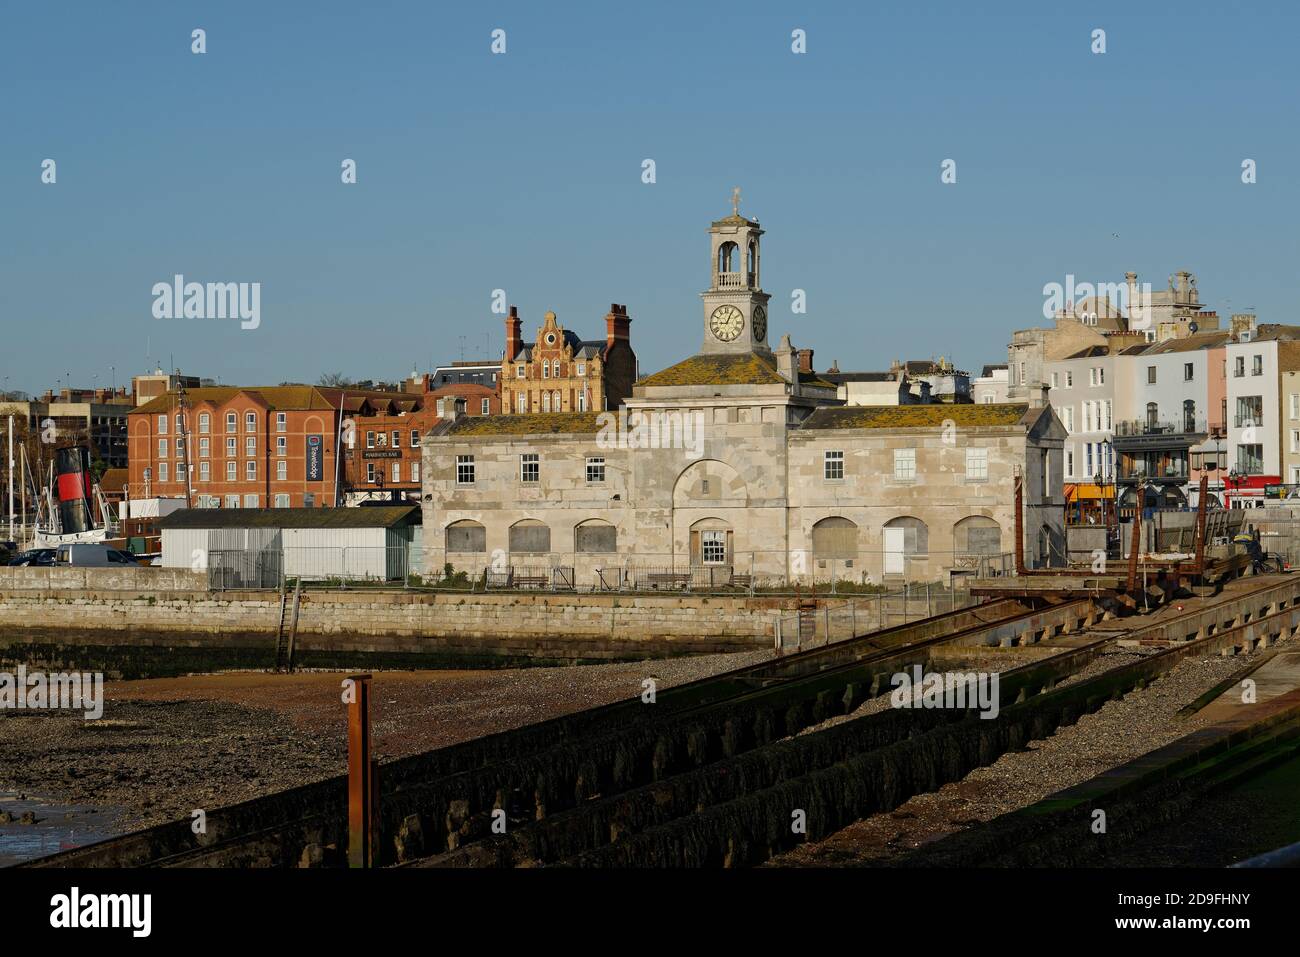 The Royal Harbour at Ramsgate in Kent. A fishing port on the Isle of Thanet, part of the county of Kent, UK. Stock Photo